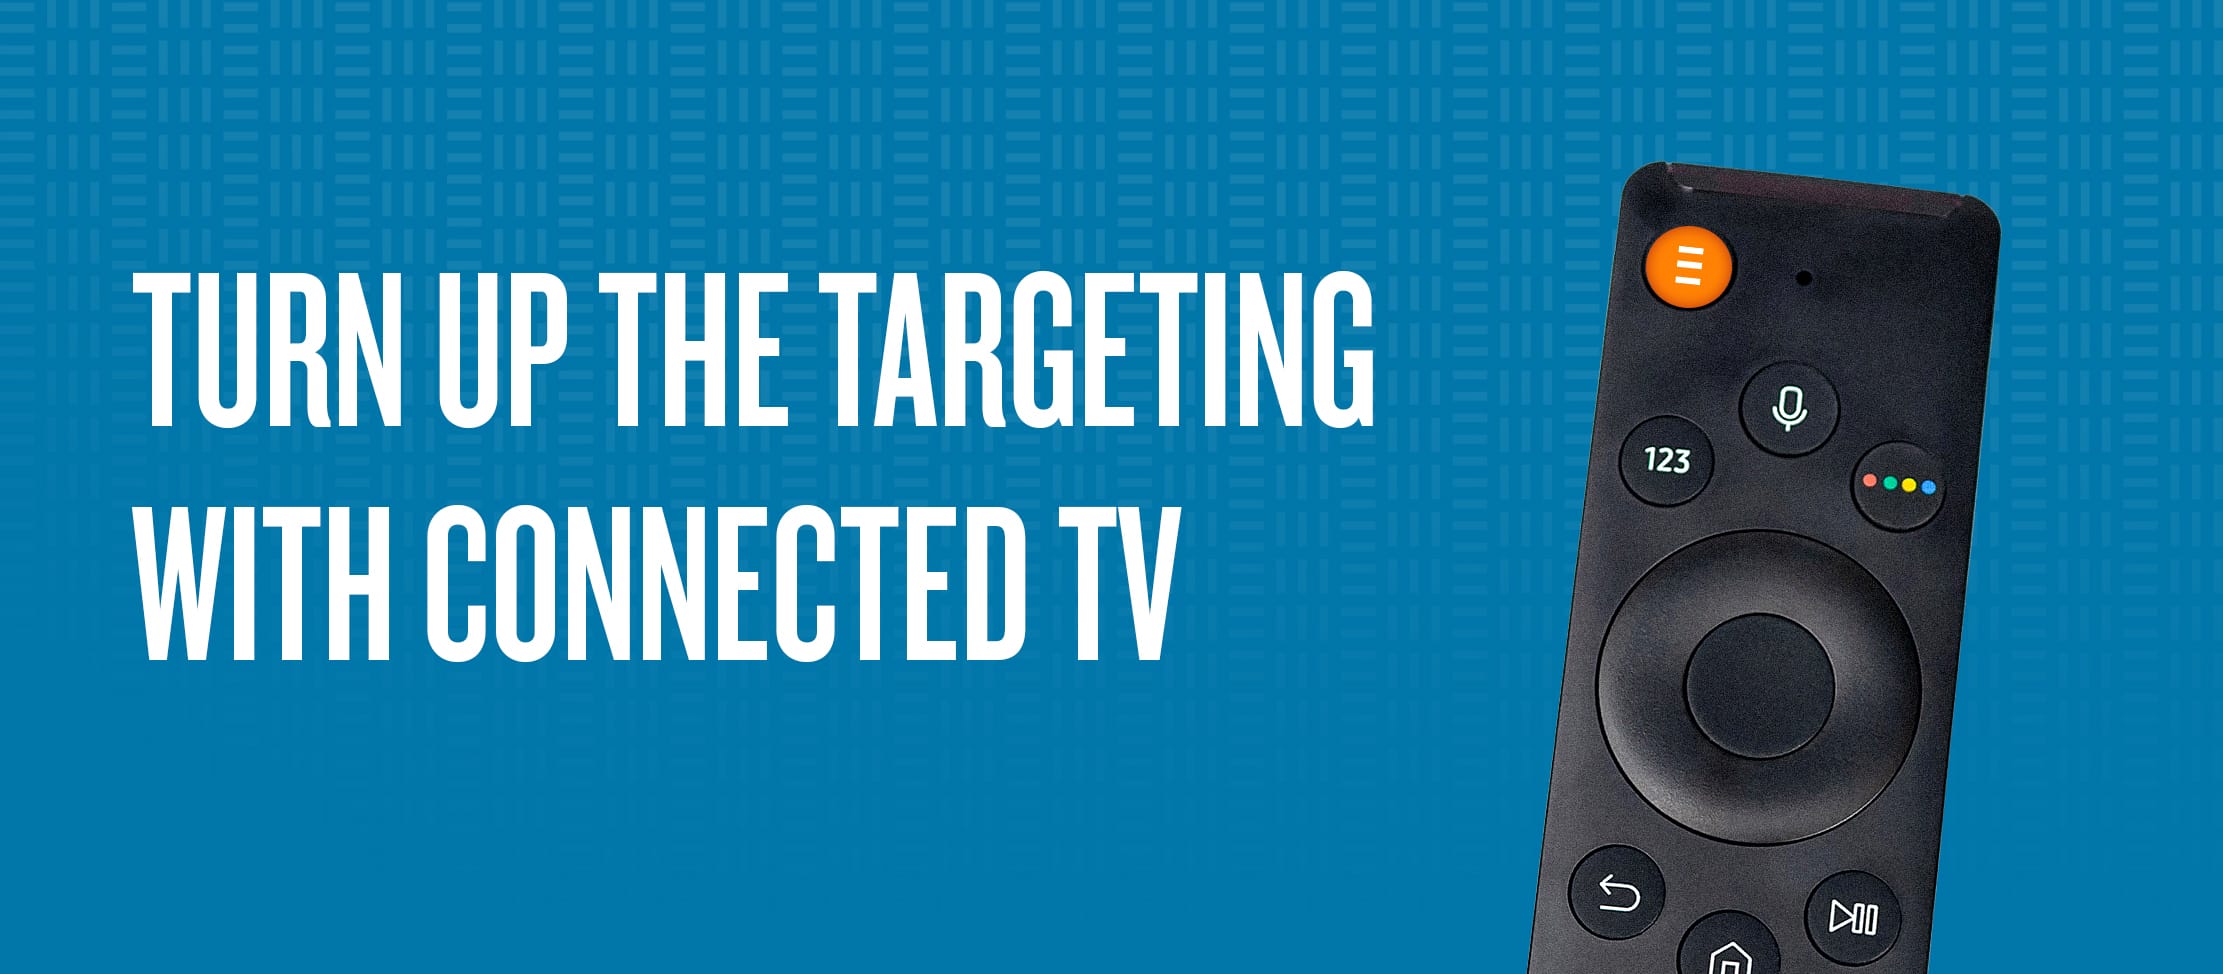 Turn Up The Targeting with Connected TV, an EPIC Blog